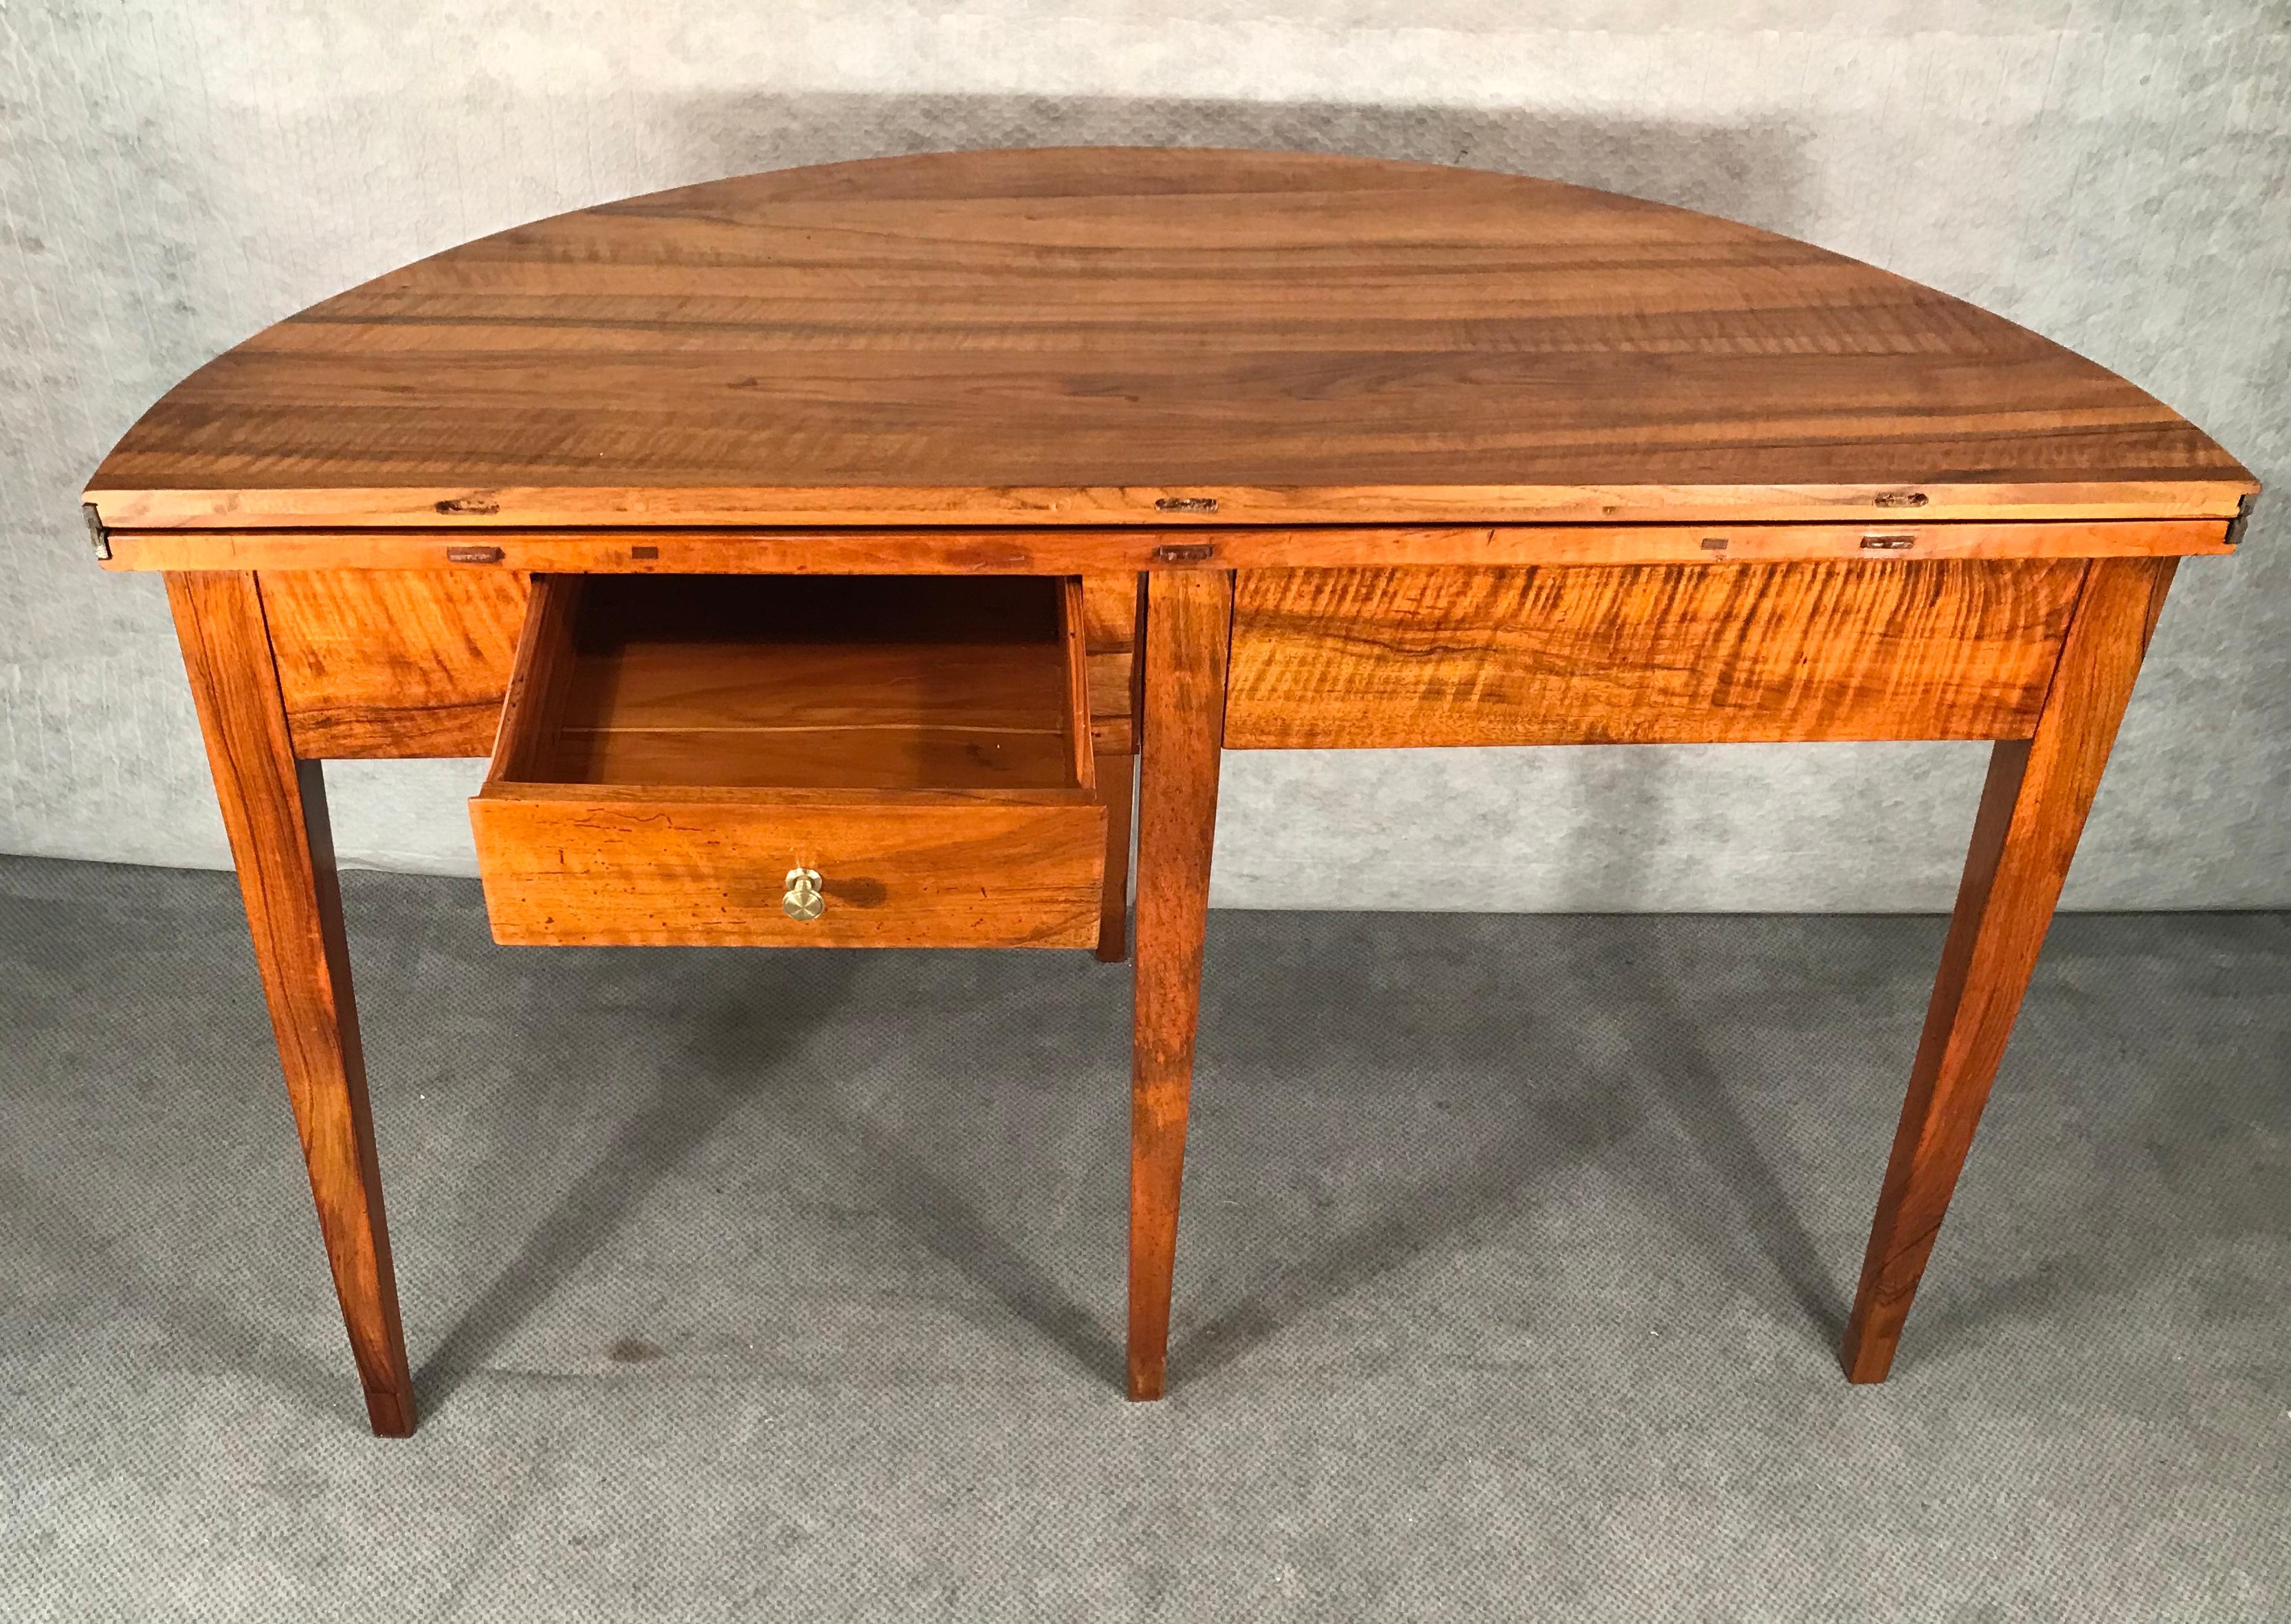 Early 19th Century Demilune Table, South German 1820, Walnut